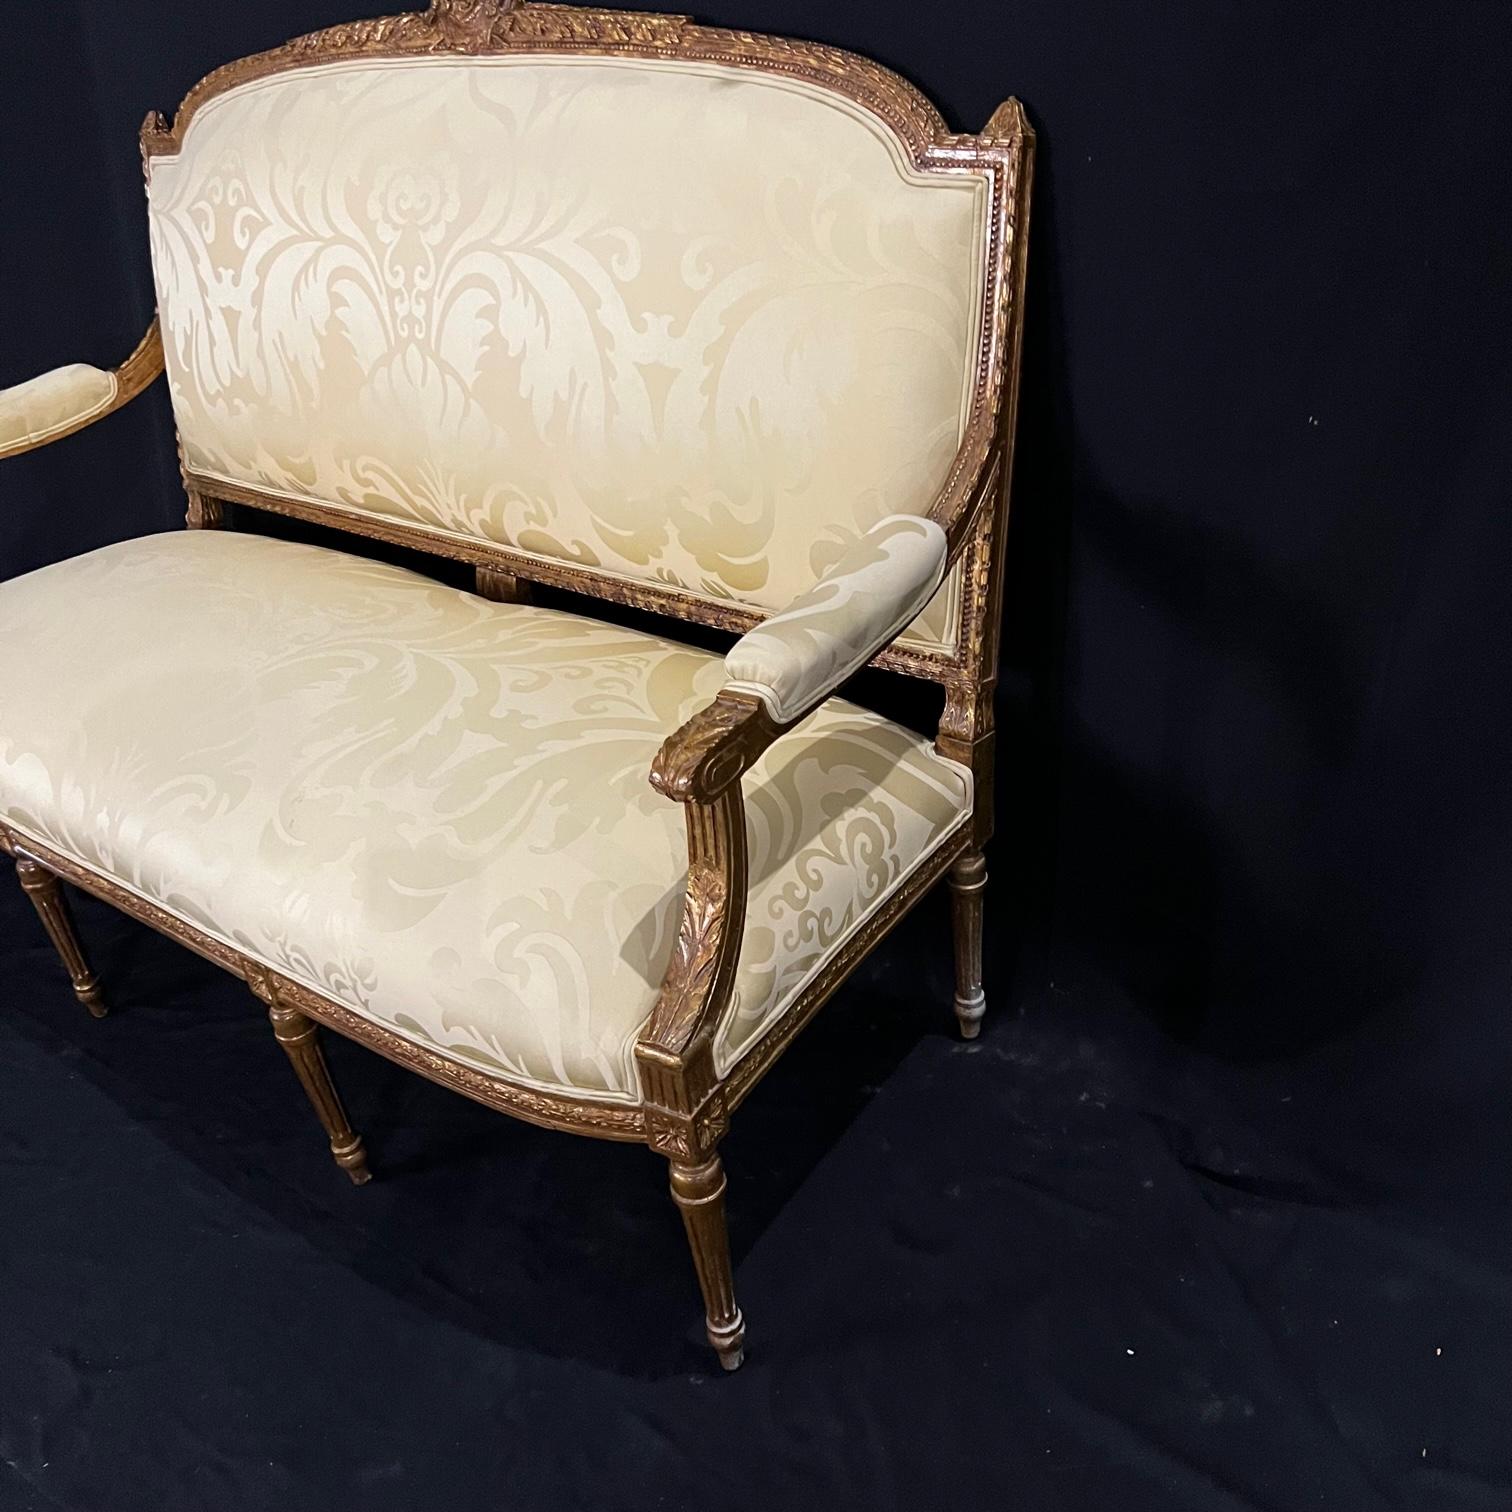 Fancy Louis XVI Giltwood Sofa Loveseat with New Silk Upholstery In Good Condition For Sale In Hopewell, NJ